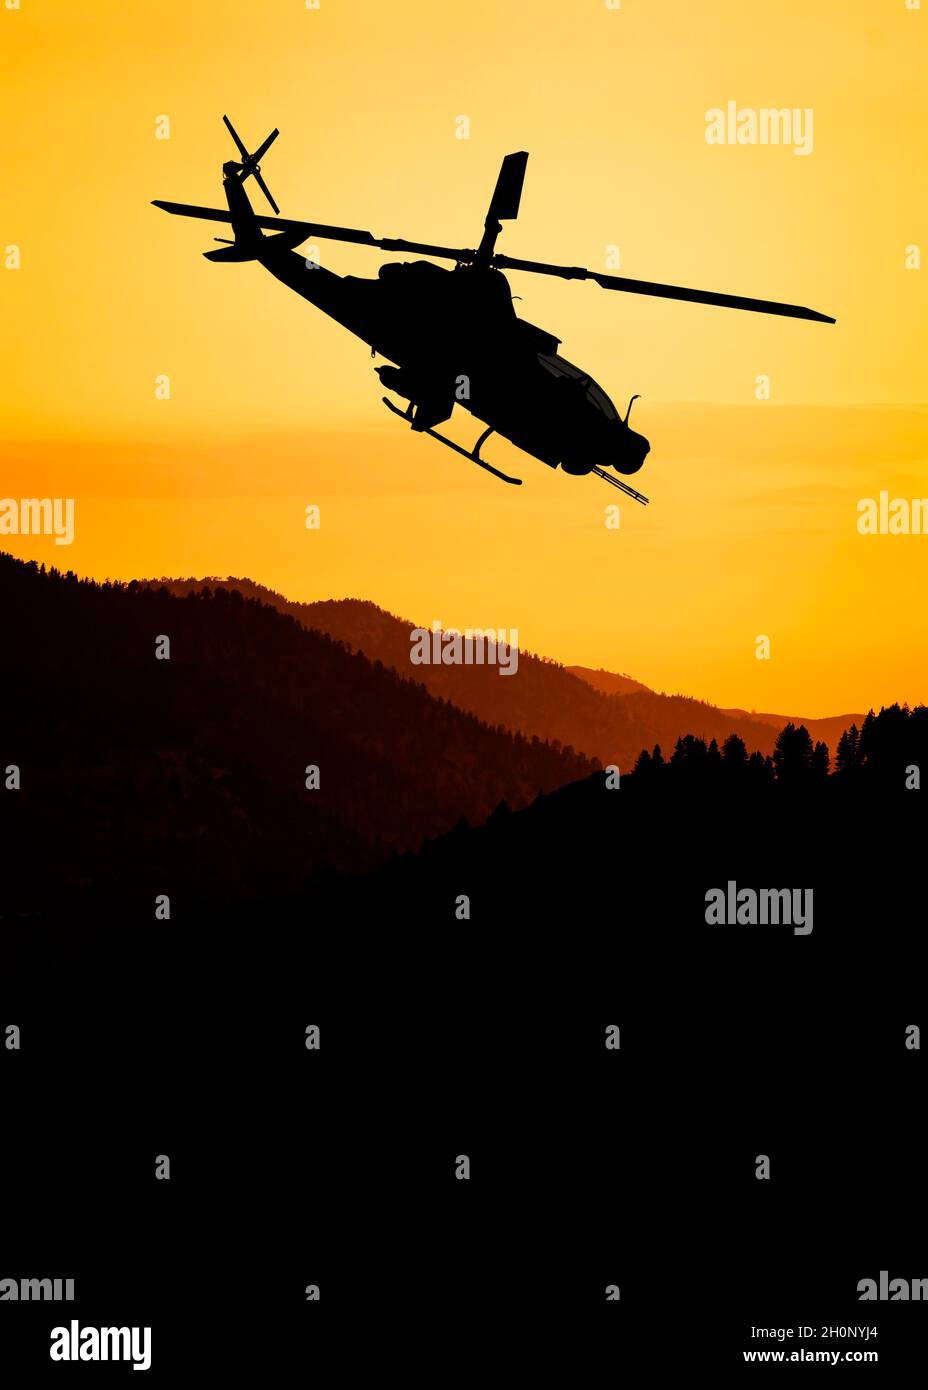 American attack helicopter silhouette in the flight Stock Photo